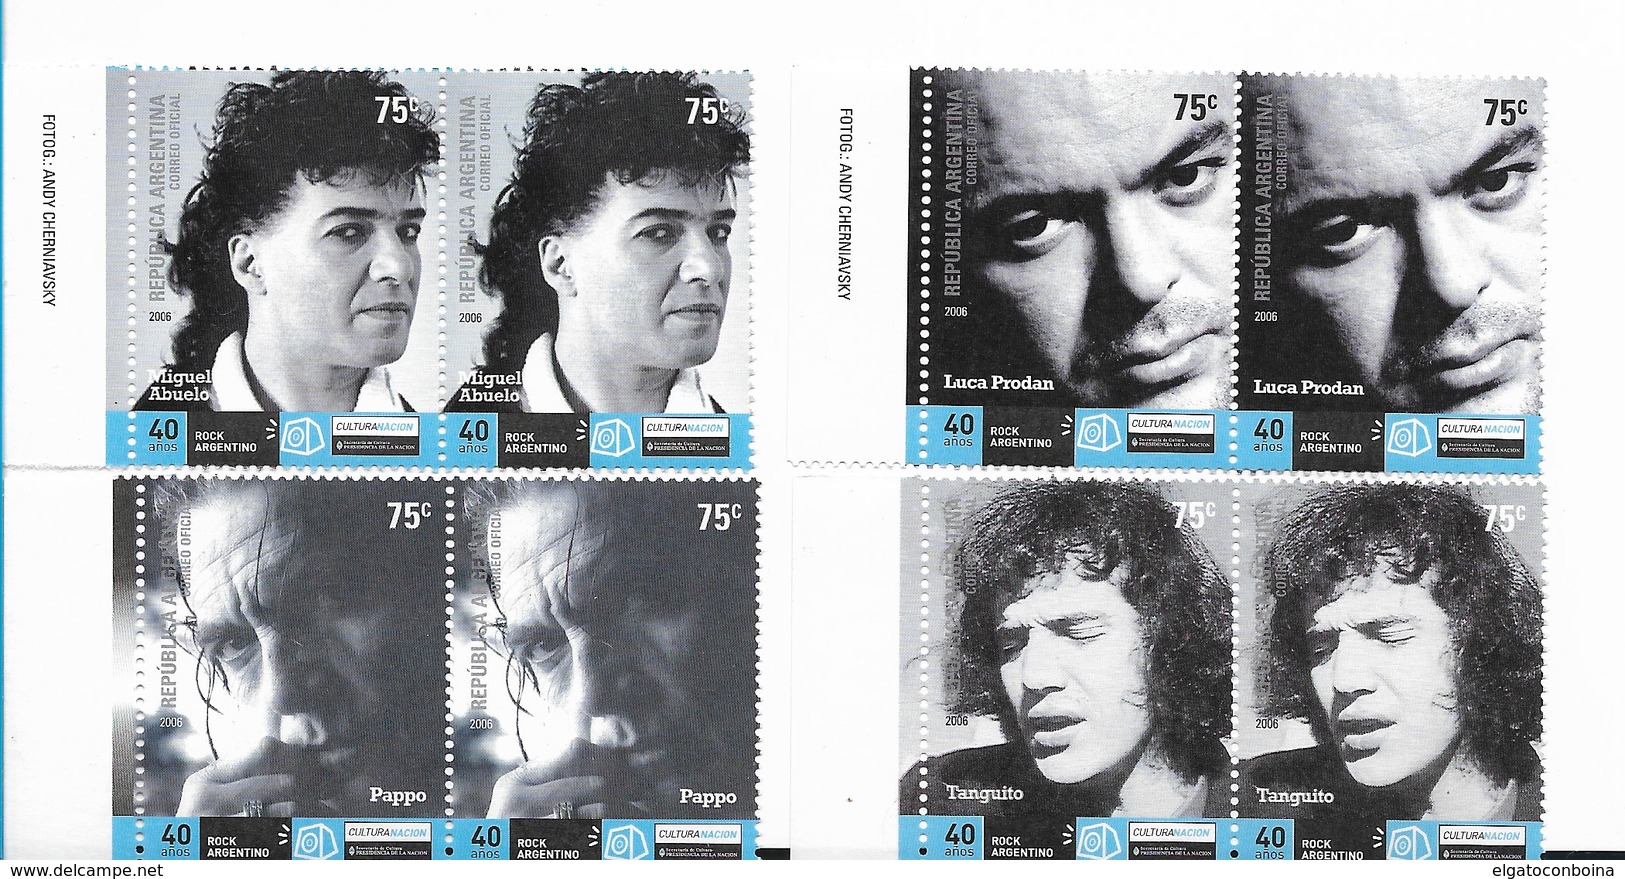 ARGENTINA 2006 NATIONAL ROCK SINGER MUSICIANMUSIC LUCA PRODAN PAPPO MIGUEL ABUELO TANGUITO SET OF 4 PAIRS - Neufs